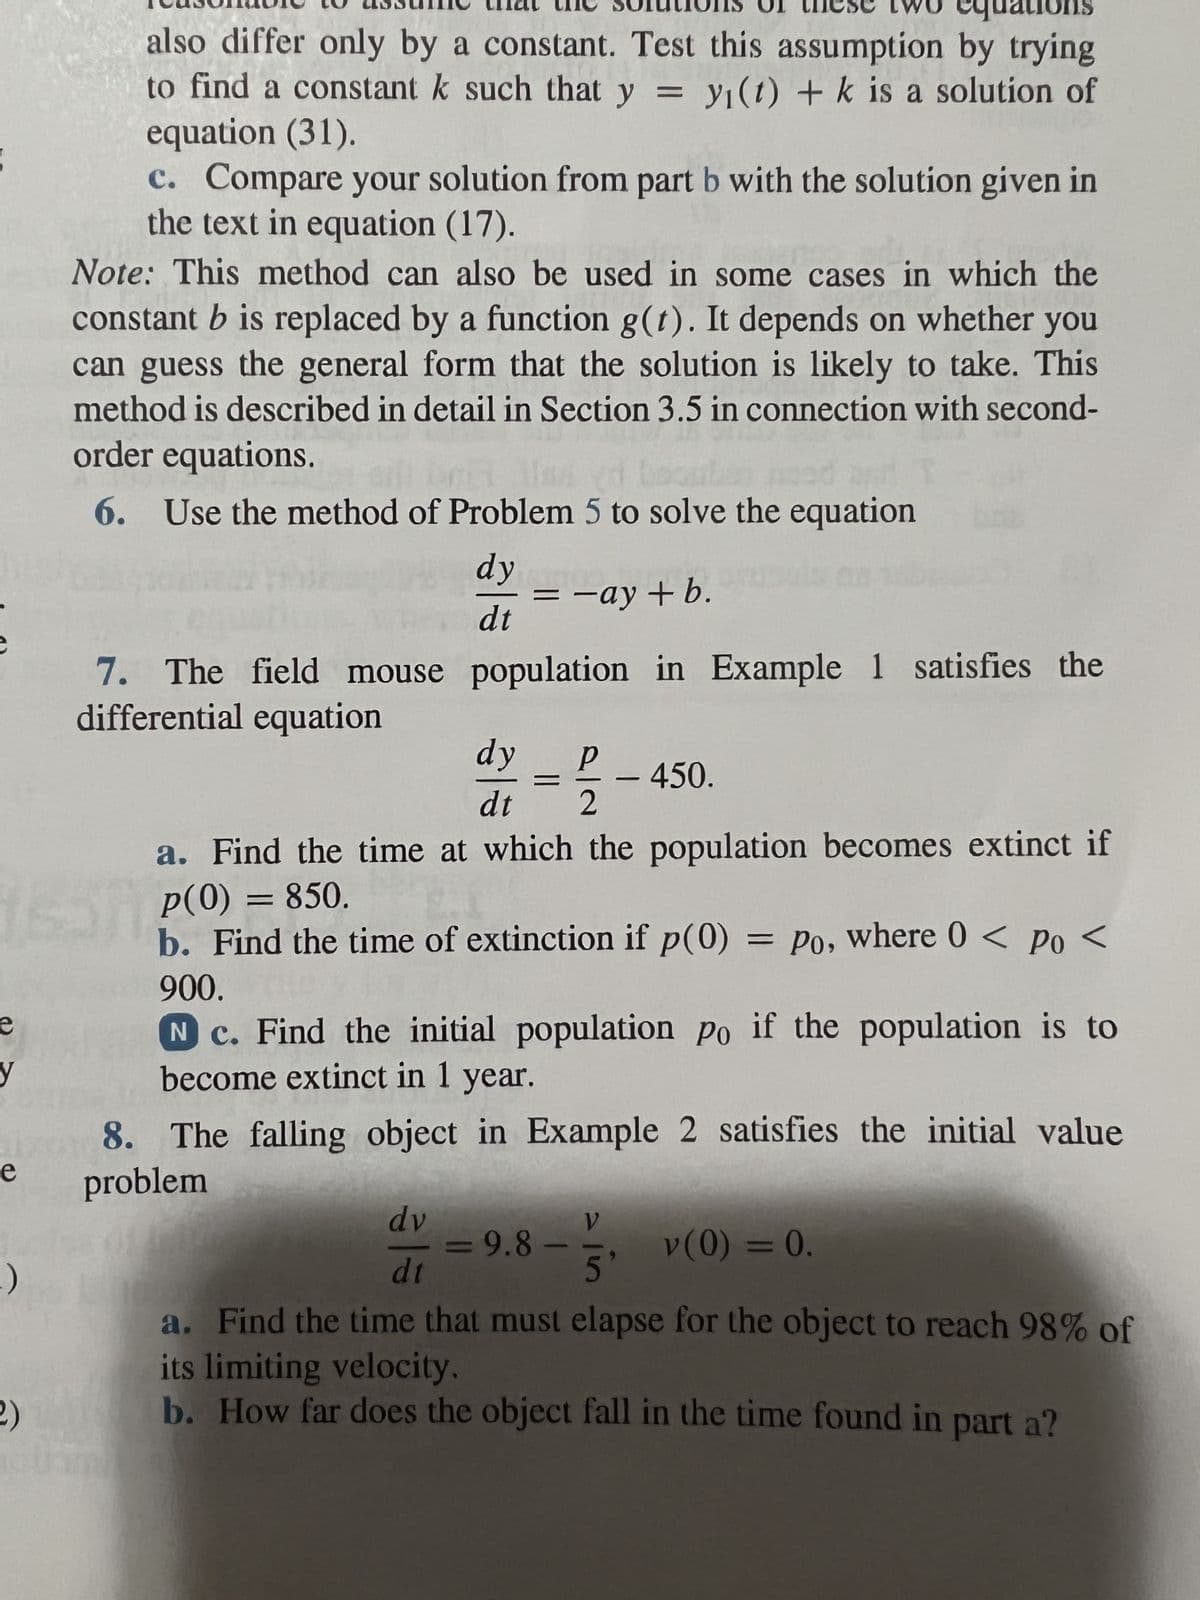 e
y
e
:)
2)
also differ only by a constant. Test this assumption by trying
to find a constant k such that y = y(t) + k is a solution of
equation (31).
c. Compare your solution from part b with the solution given in
the text in equation (17).
Note: This method can also be used in some cases in which the
constant b is replaced by a function g(t). It depends on whether you
can guess the general form that the solution is likely to take. This
method is described in detail in Section 3.5 in connection with second-
order equations.
20
sed
6. Use the method of Problem 5 to solve the equation
7. The field mouse
differential equation
dy
= -ay+b.
dt
population in Example 1 satisfies the
dy P
dt 2
-
450.
a. Find the time at which the population becomes extinct if
p(0) = 850.
b. Find the time of extinction if p(0) = Po, where 0 < Po <
900.
N c. Find the initial population po if the population is to
become extinct in 1 year.
8. The falling object in Example 2 satisfies the initial value
problem
dv
dt
a. Find the time that must elapse for the object to reach 98% of
its limiting velocity.
b. How far does the object fall in the time found in part a?
= 9.8 5' V(0) = 0.